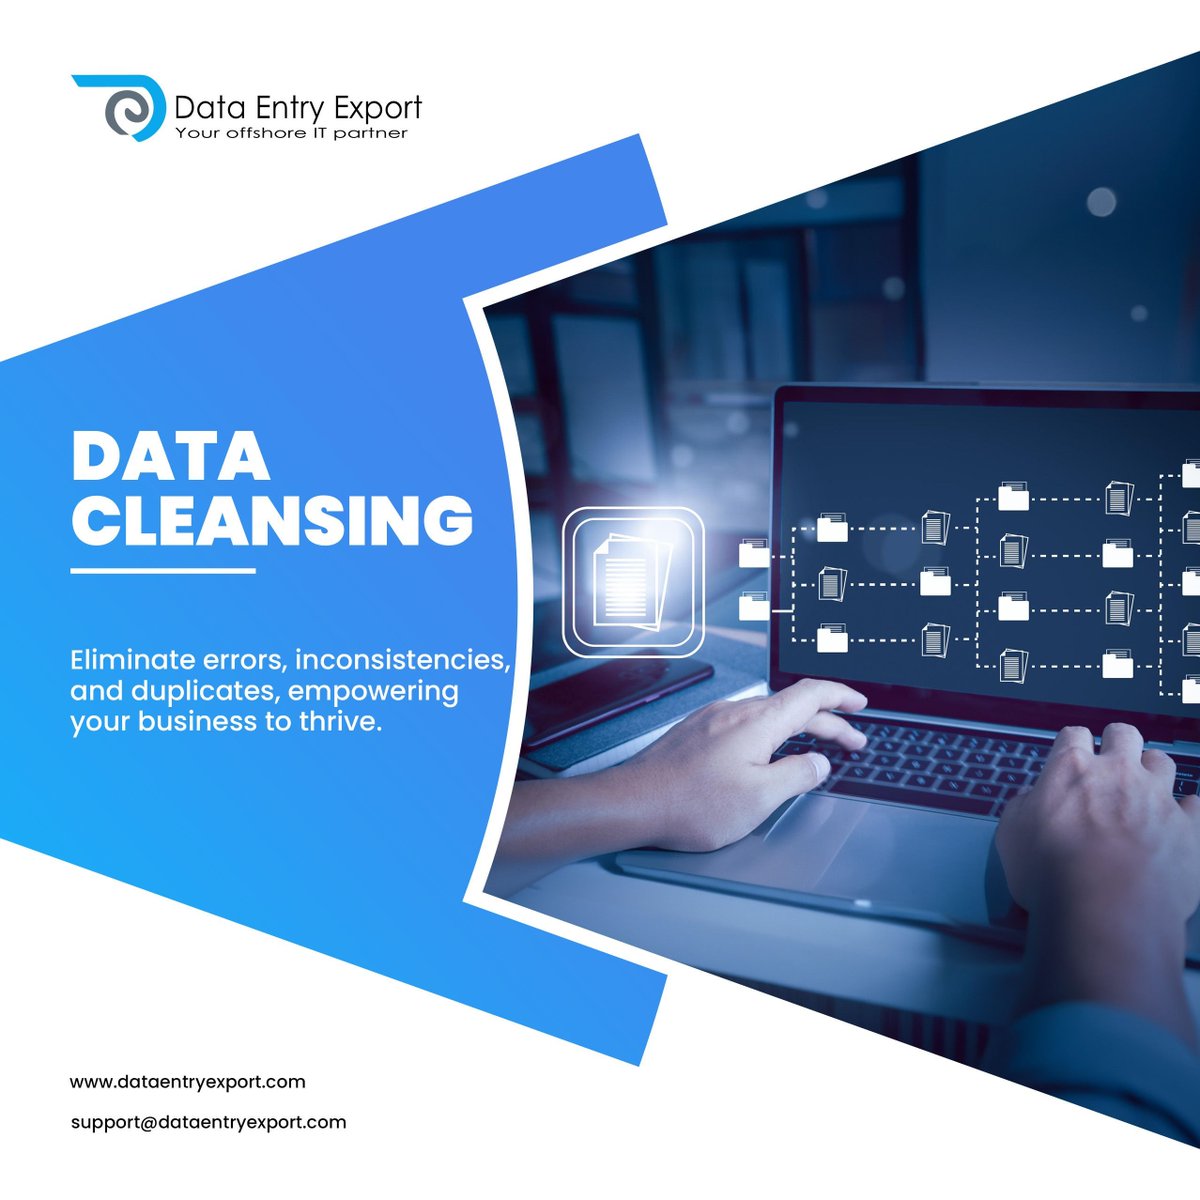 Our advanced data cleansing techniques eliminate errors and duplicates, empowering you to make informed decisions and drive #business success. 

Read more: dataentryexport.com/data-cleansing

Email us: support@dataentryexport.com

#datacleansing #datascrubbing #bposolutions #bposervices